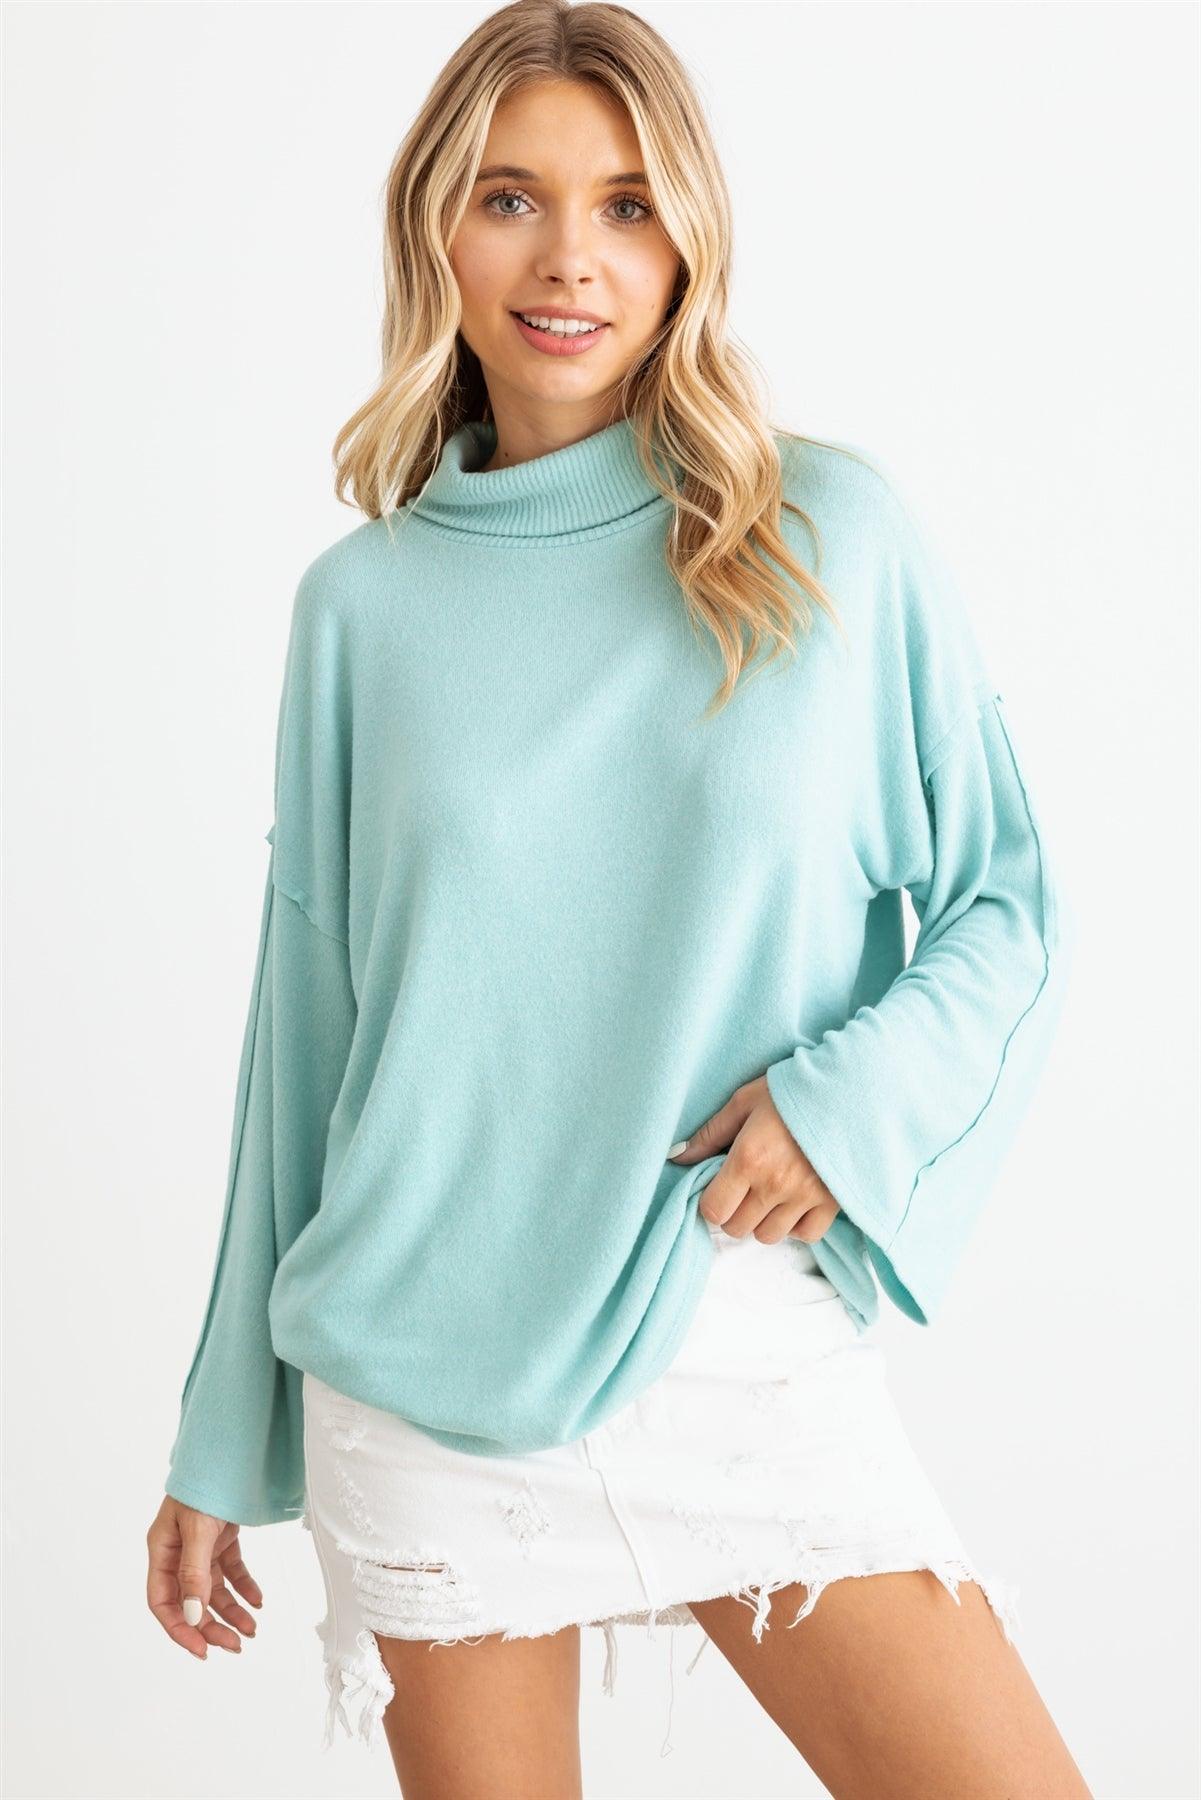 Aqua Turtle Neck Long Sleeve Soft To Touch Top 1